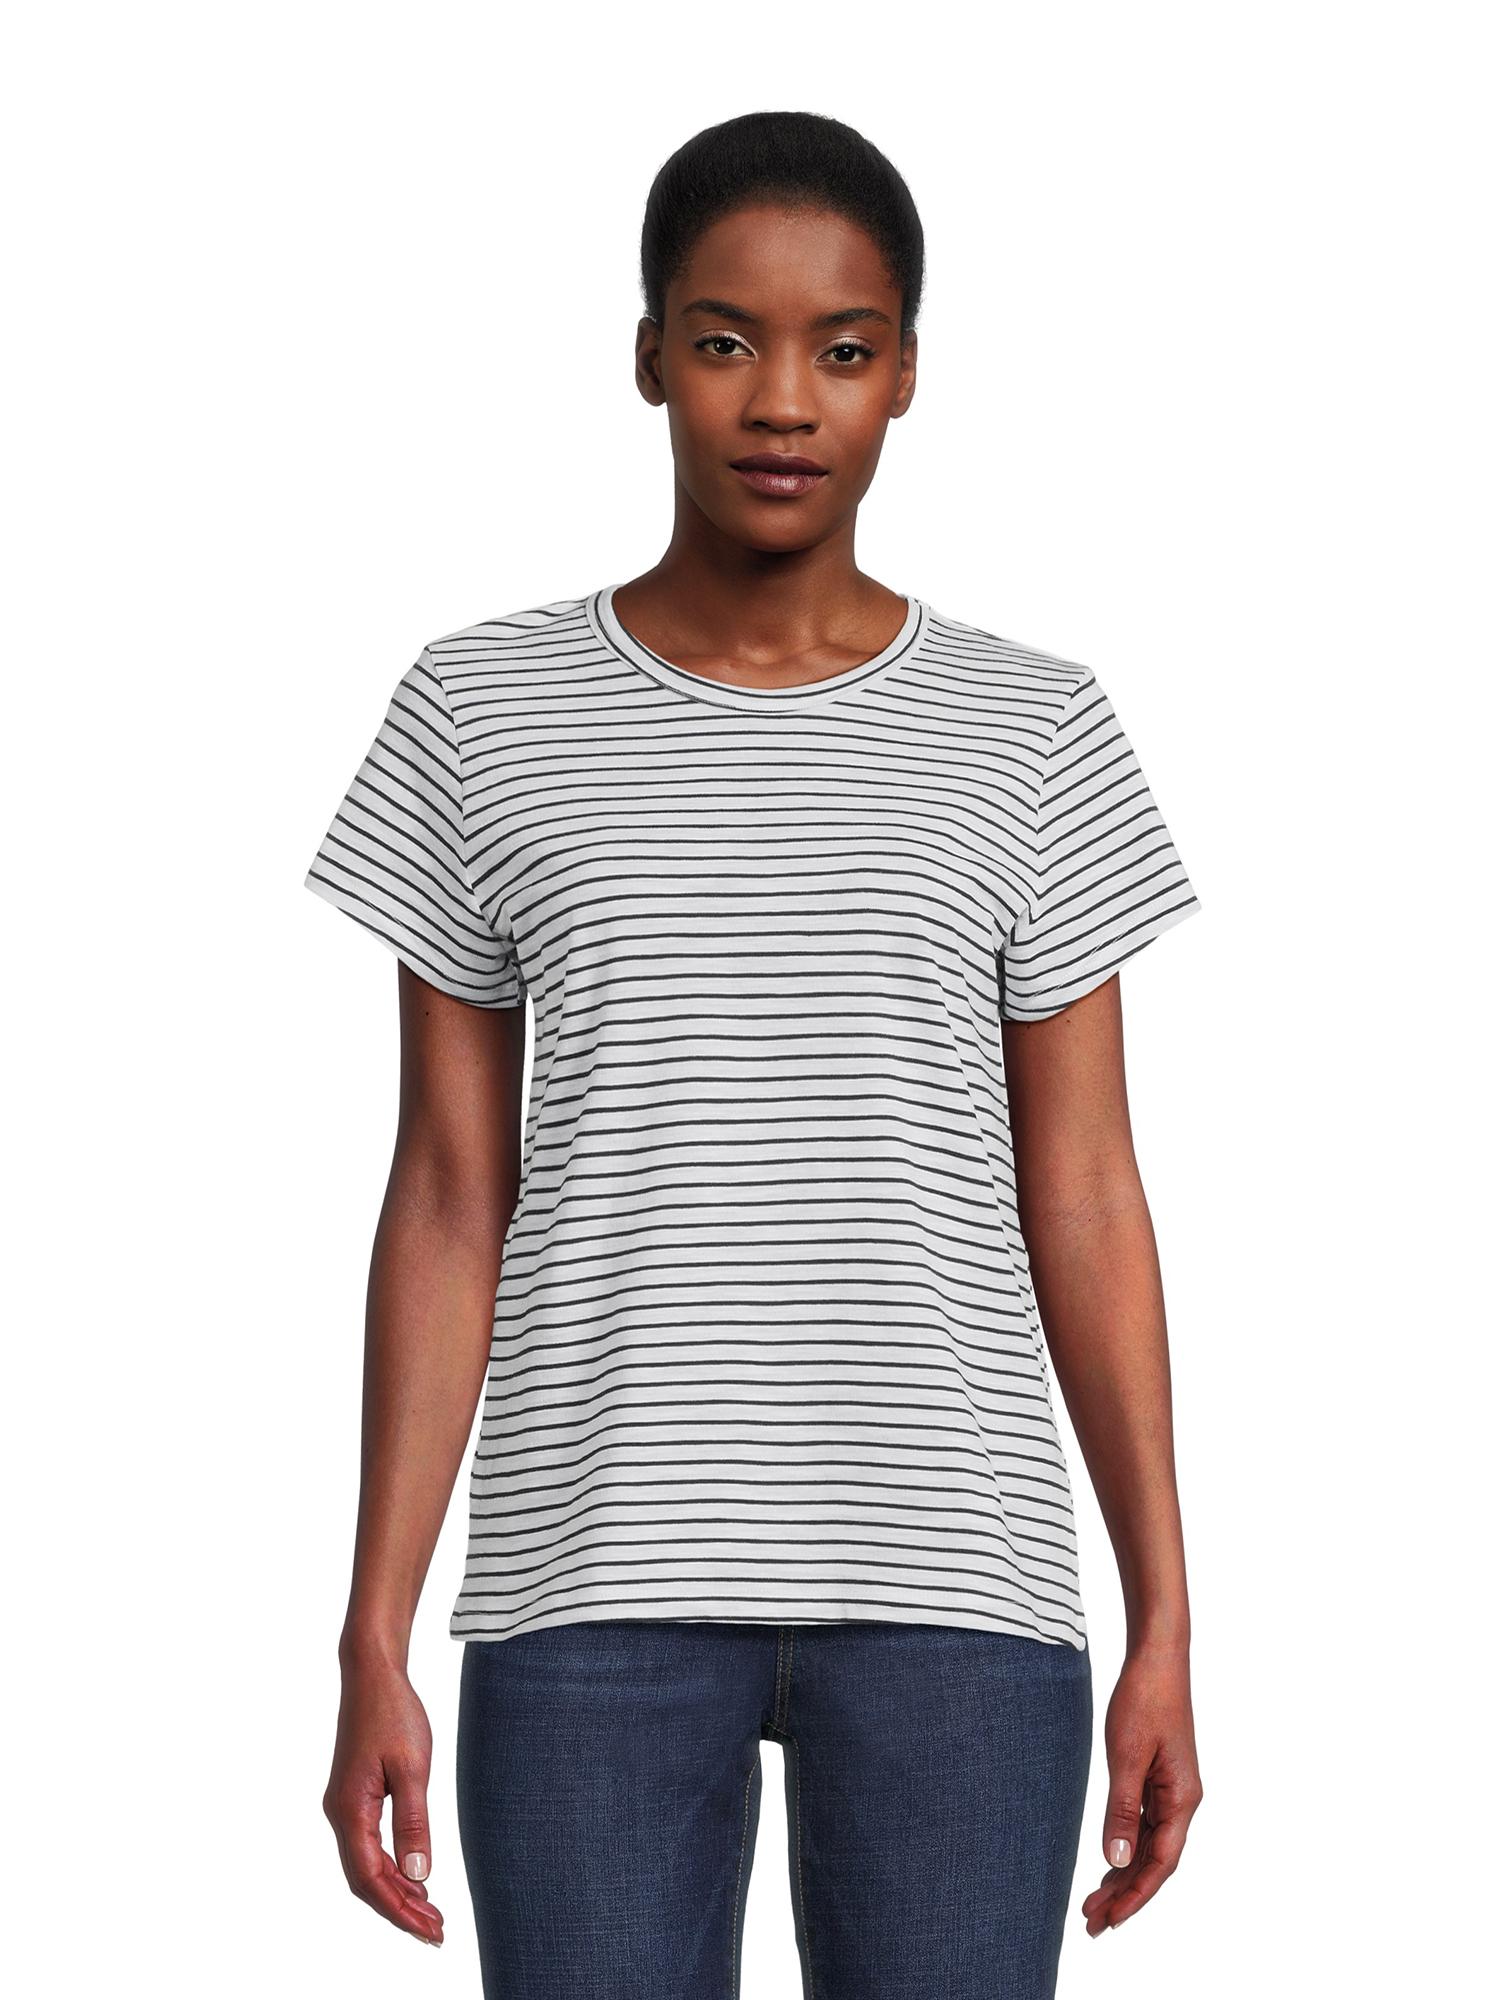 Time and Tru Women's Slub Texture Tee with Short Sleeves, Sizes S-XXXL - image 1 of 6